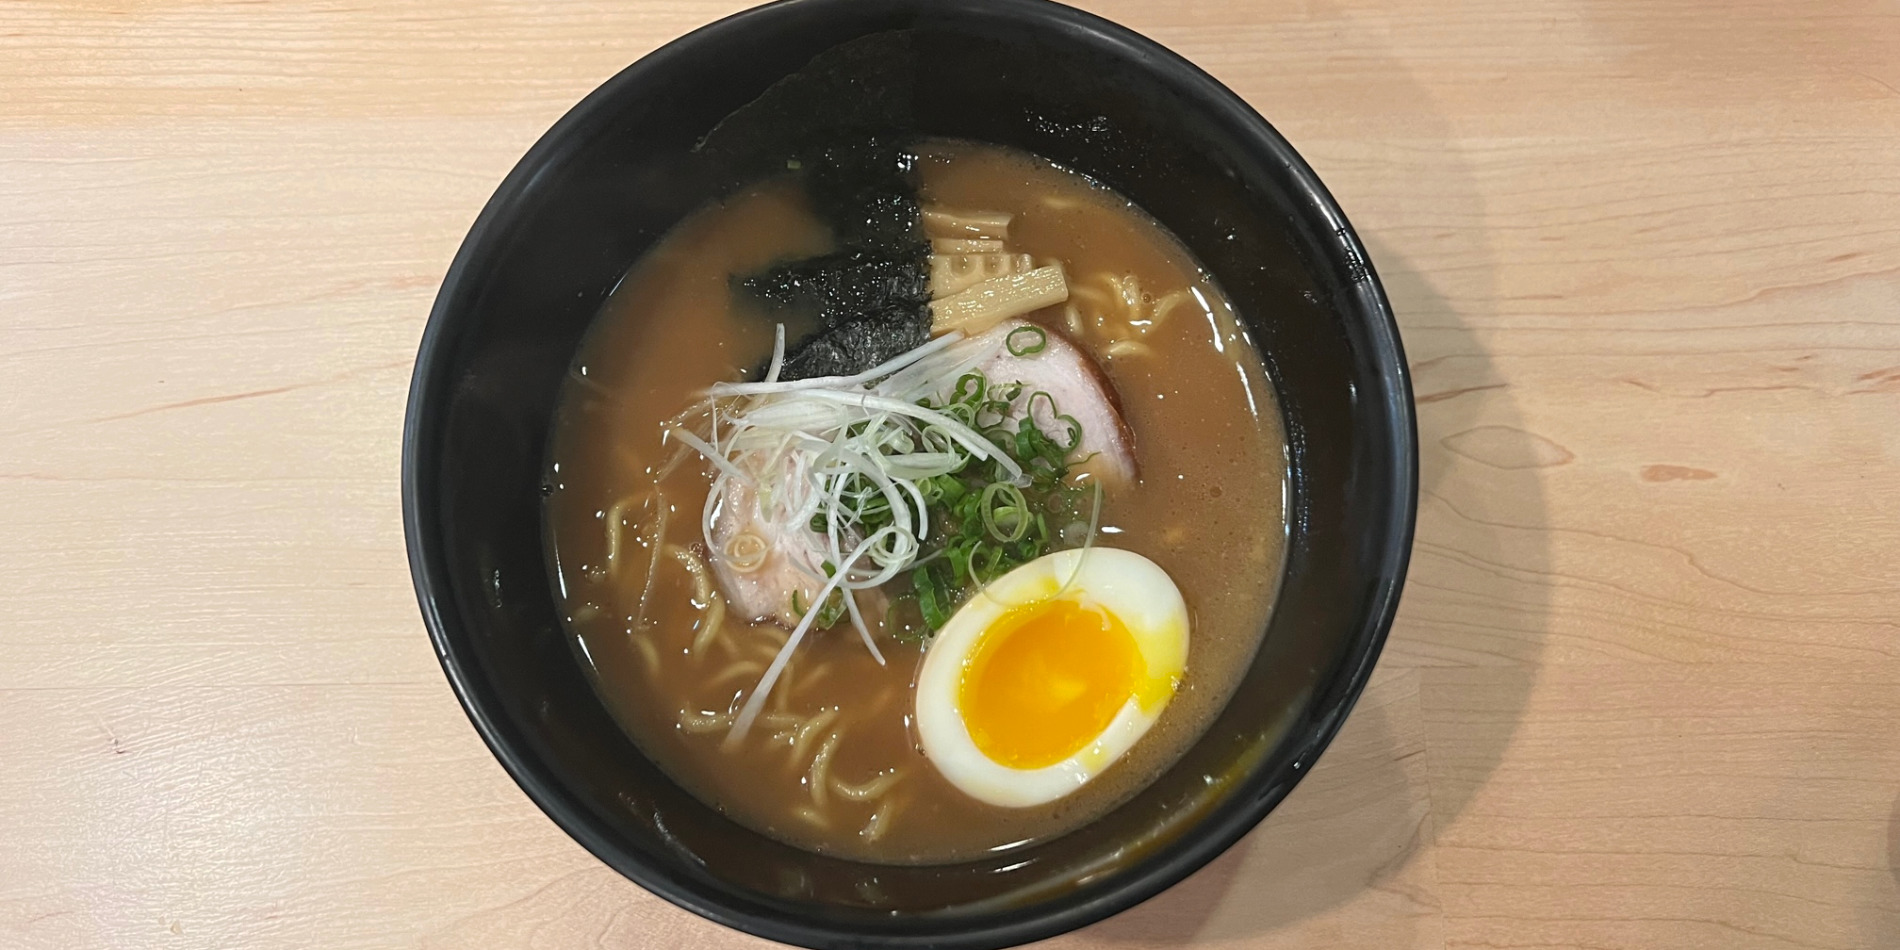 ISHI is hosting another ramen pop-up